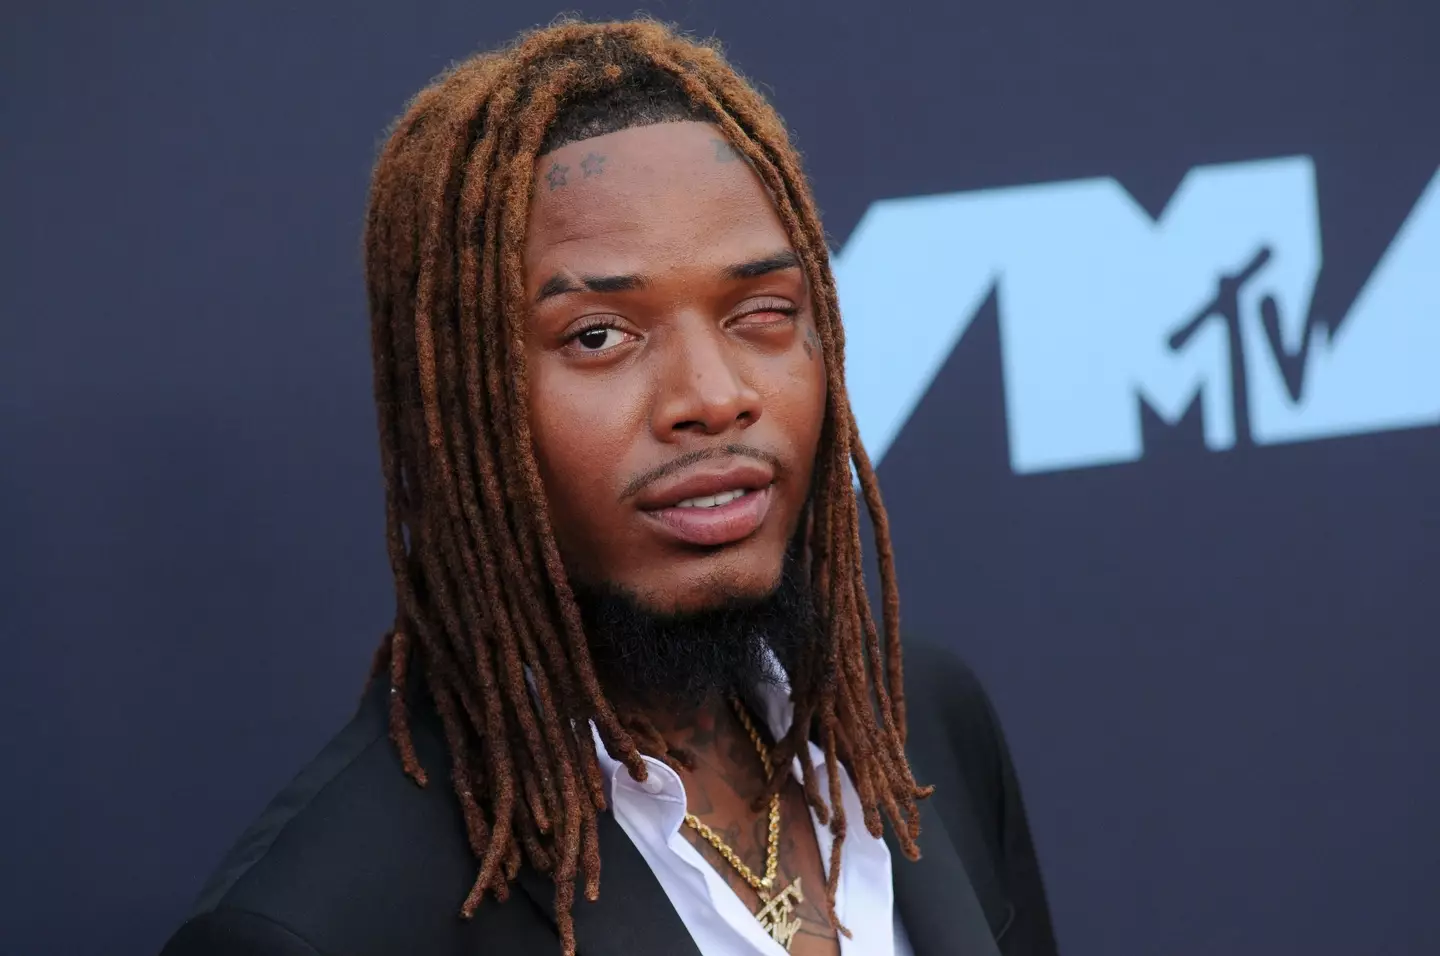 Fetty Wap shot to stardom in 2015 after the release of his debut album.